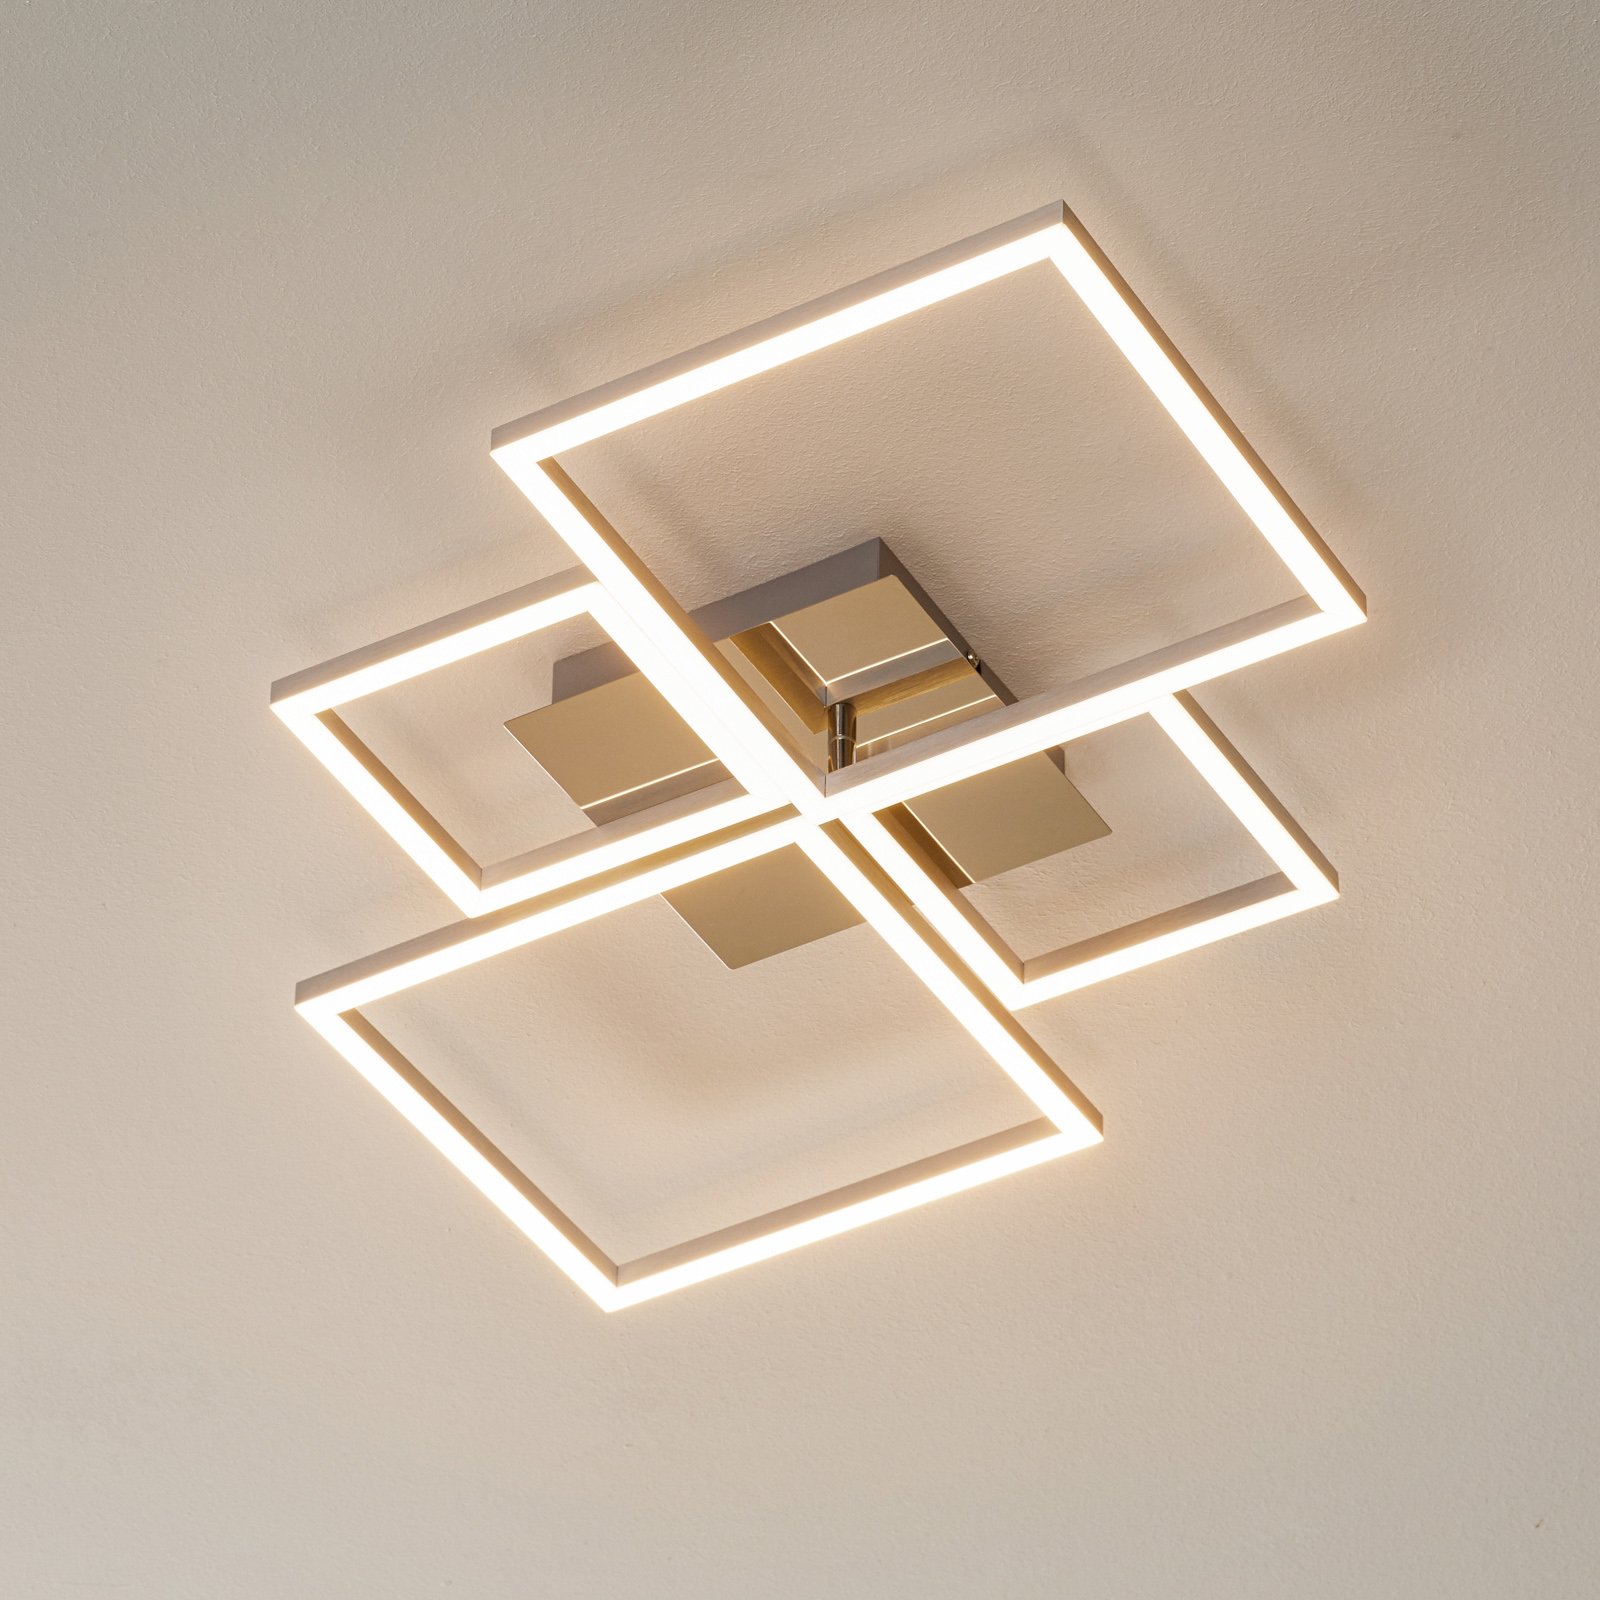 Frame LED ceiling lamp, dimmable via wall switch